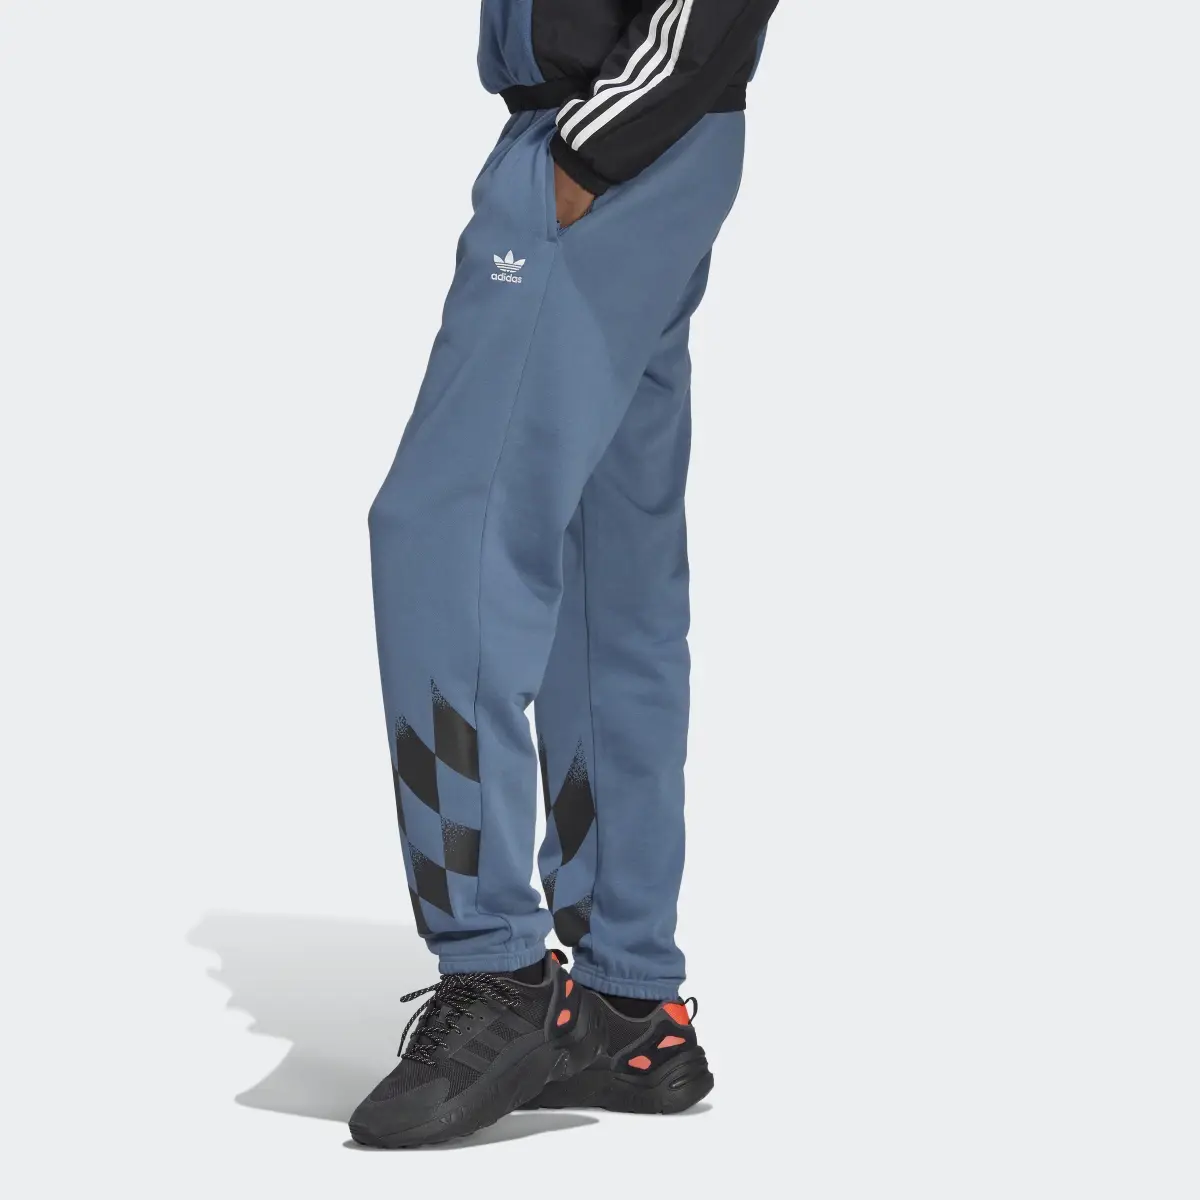 Adidas Rekive Placed Graphic Sweat Pants. 2